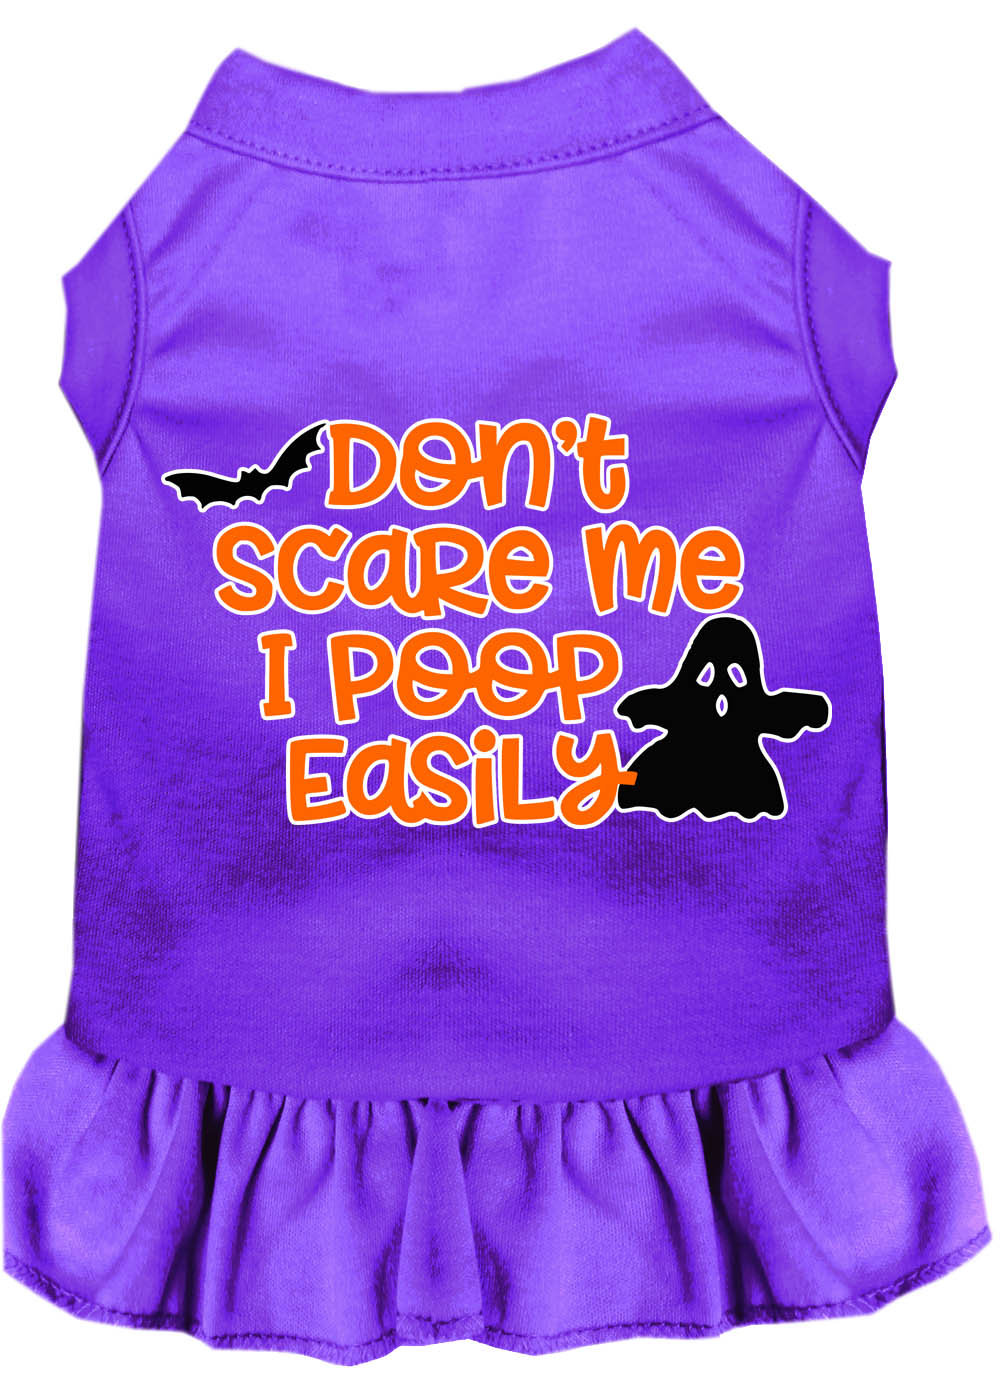 Don't Scare Me, Poops Easily Screen Print Dog Dress Purple Sm